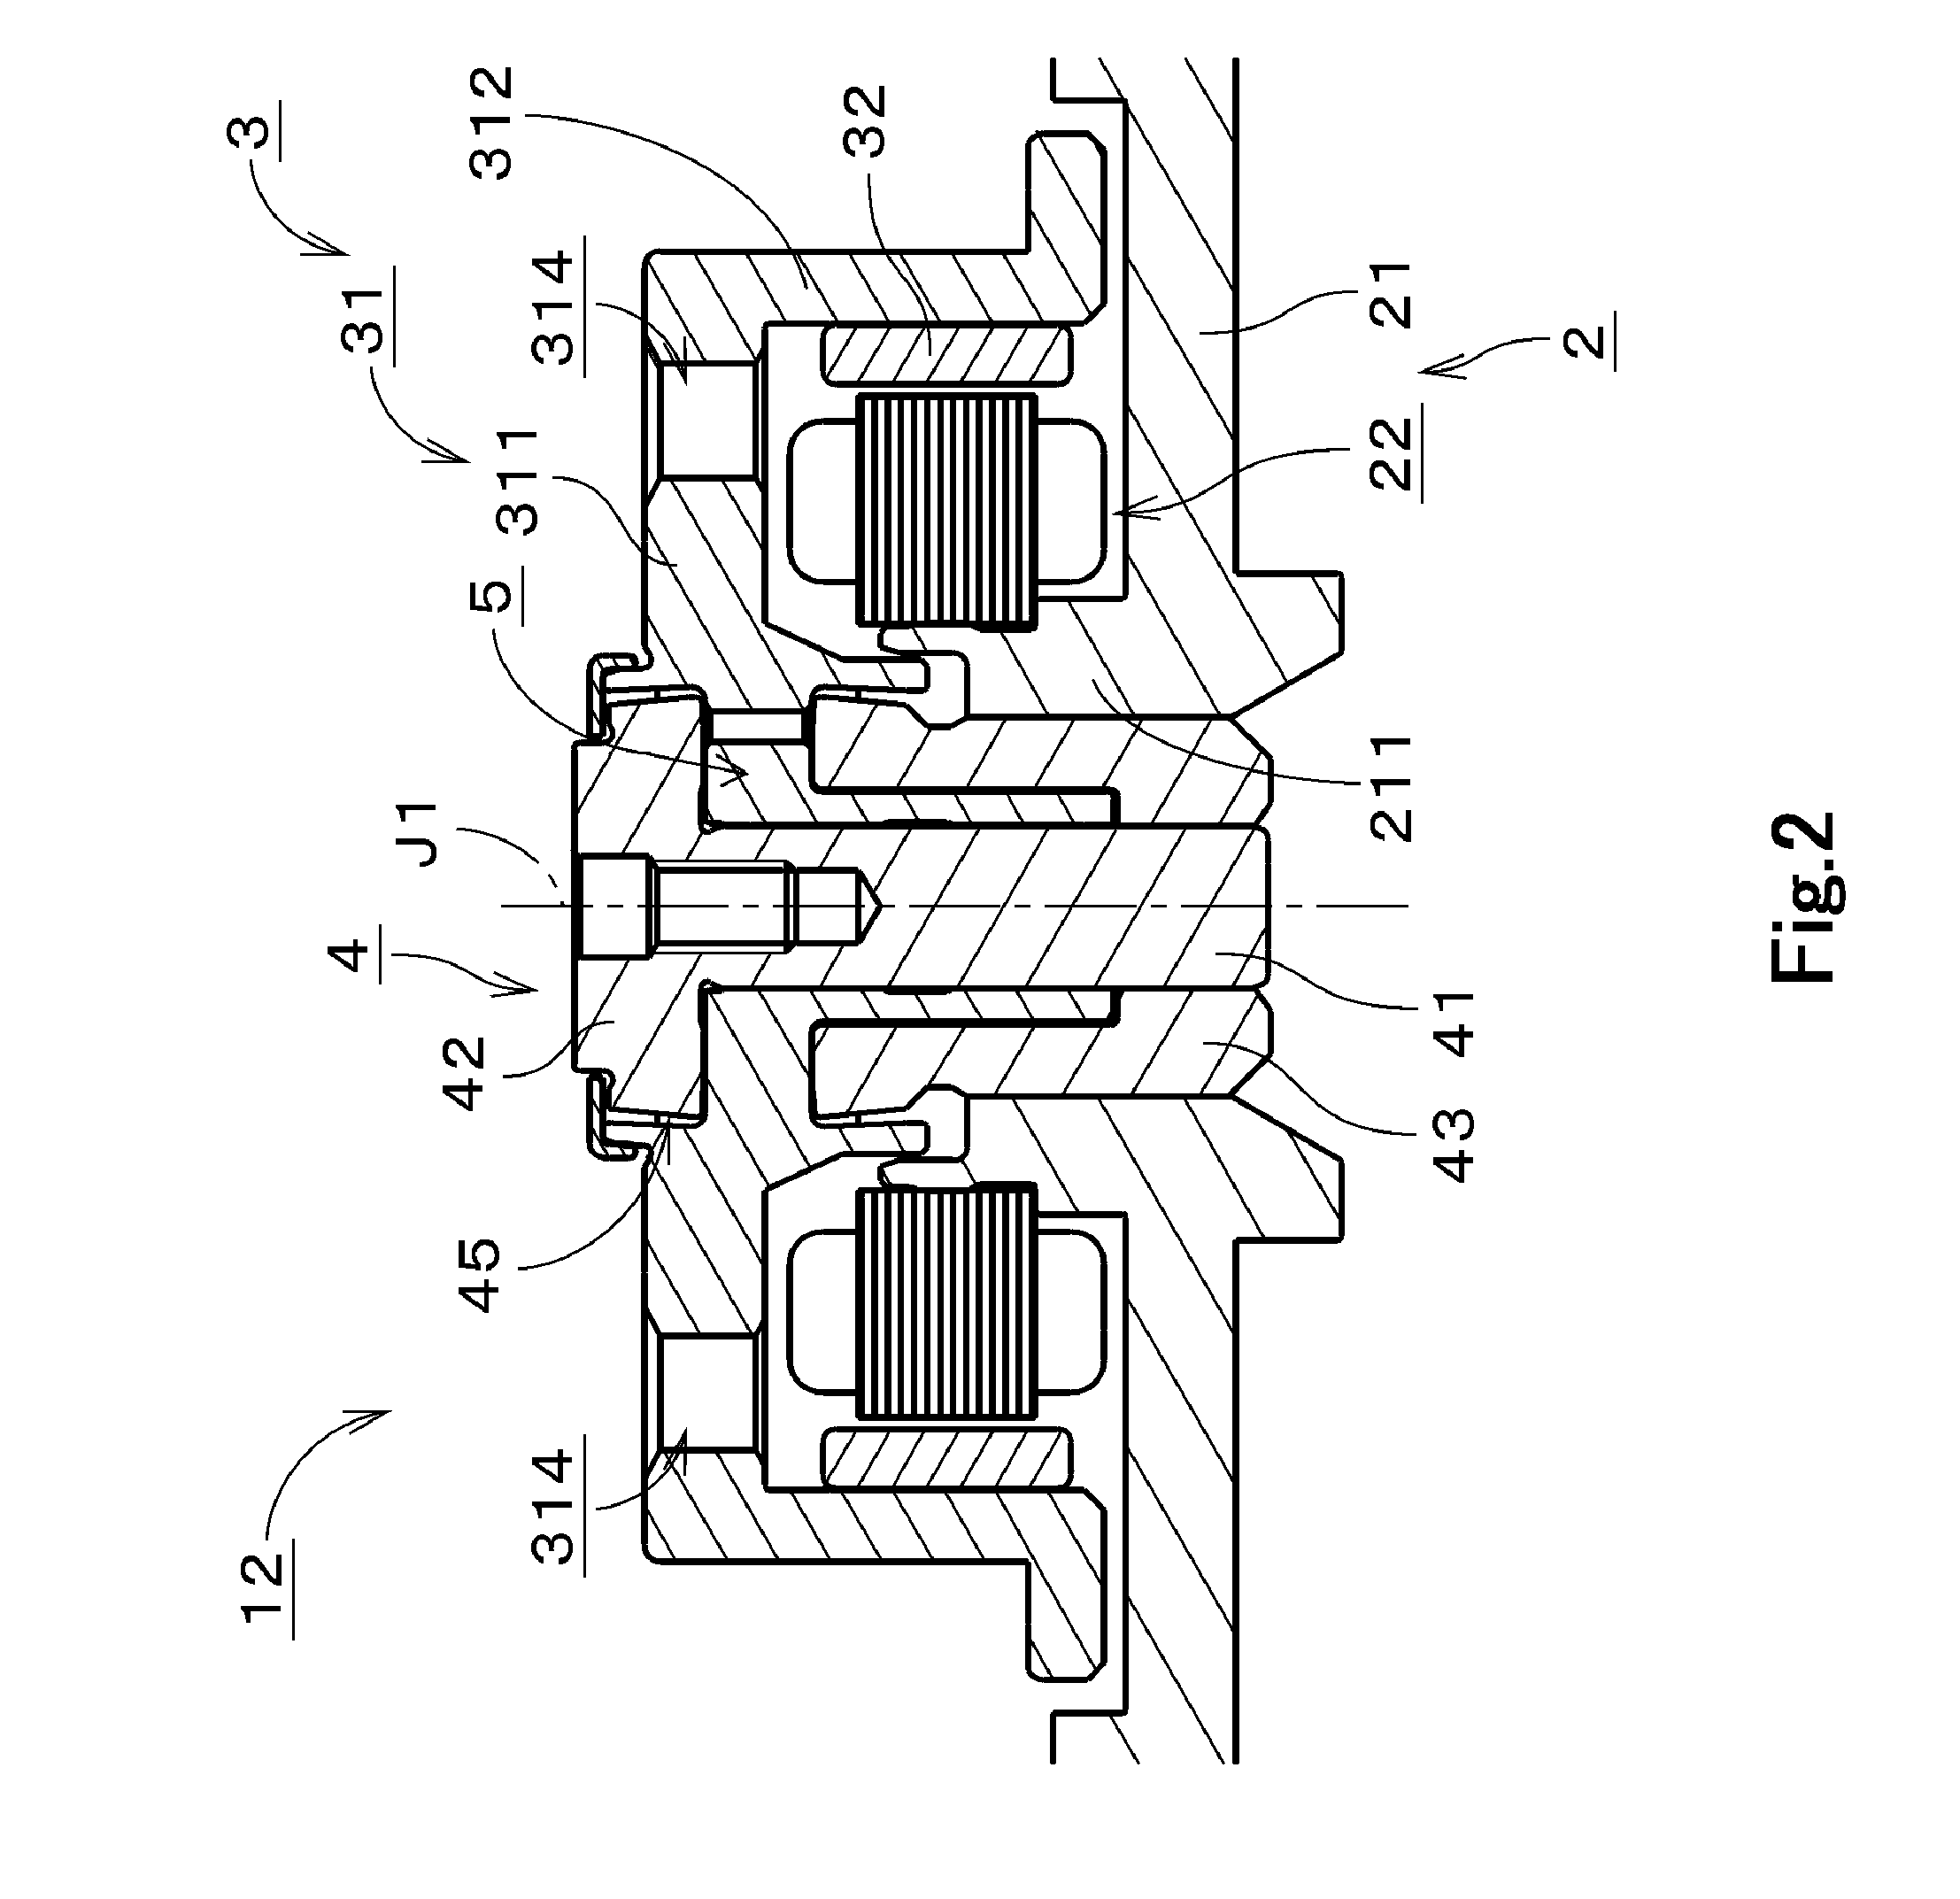 Spindle motor having dynamic pressure fluid bearing for use in a storage disk drive